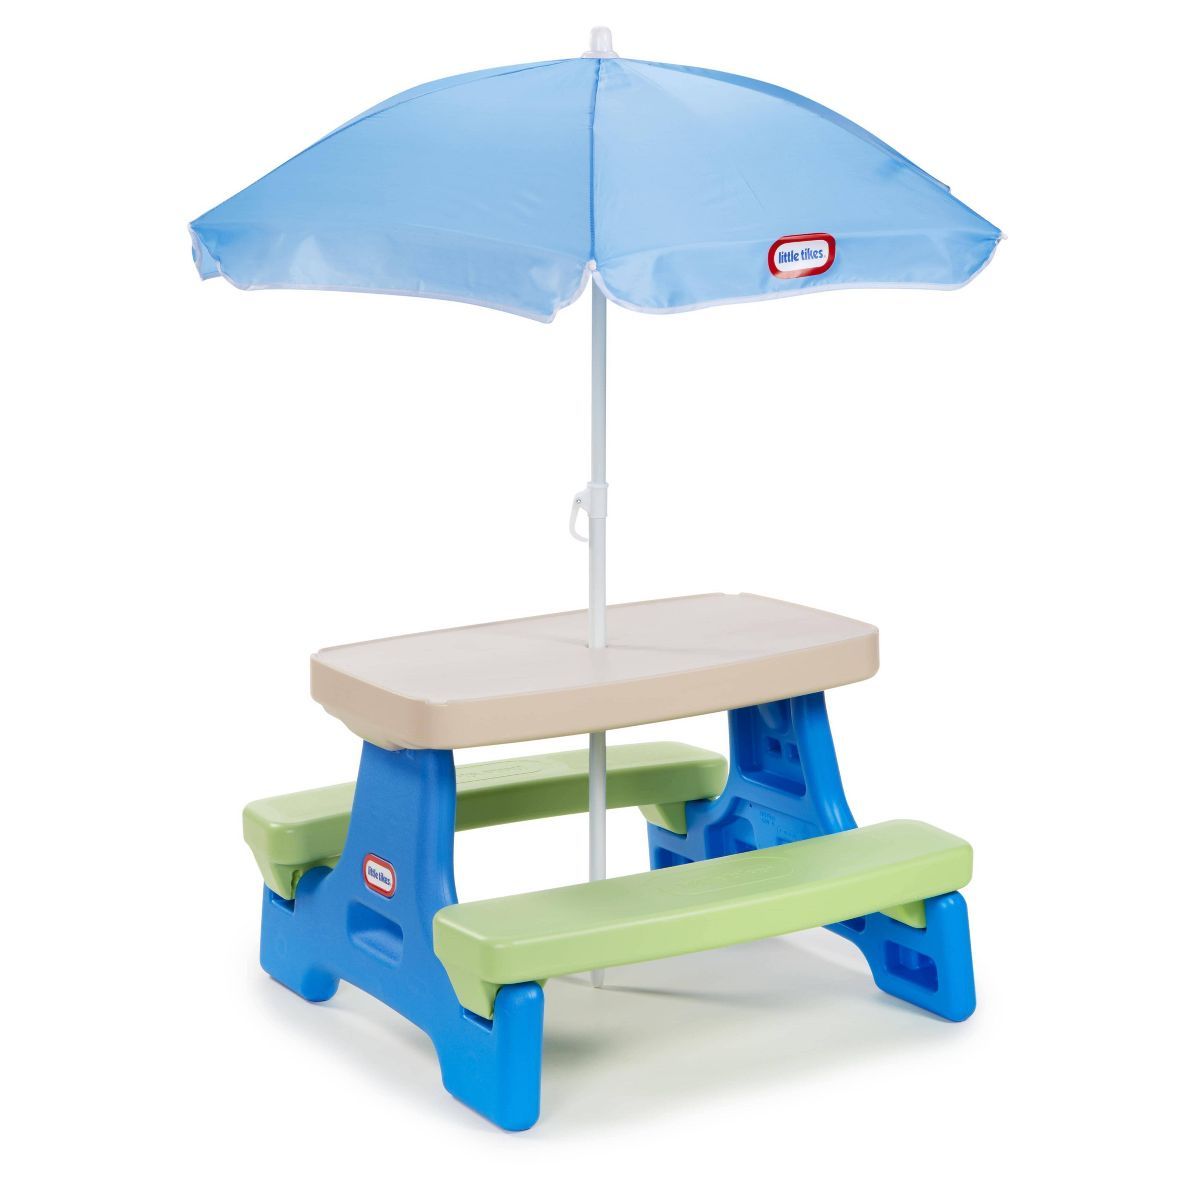 Little Tikes Easy Store Jr. Play Table with Umbrella | Target